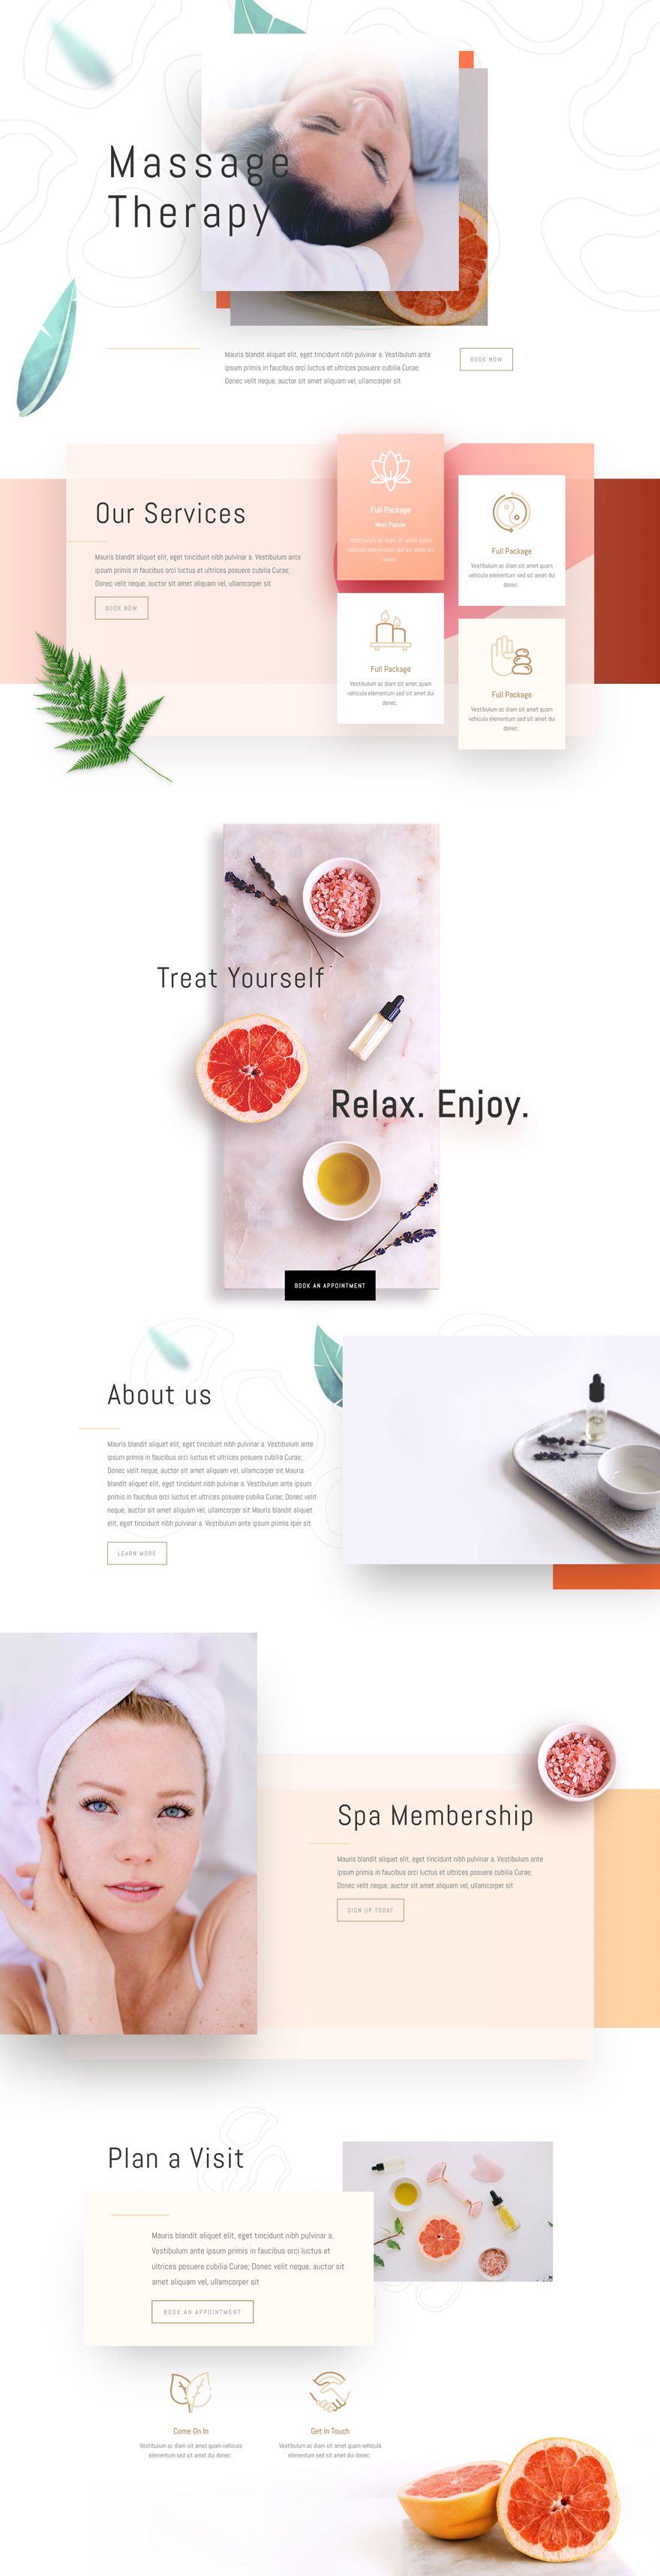 divi massage therapy layout pack